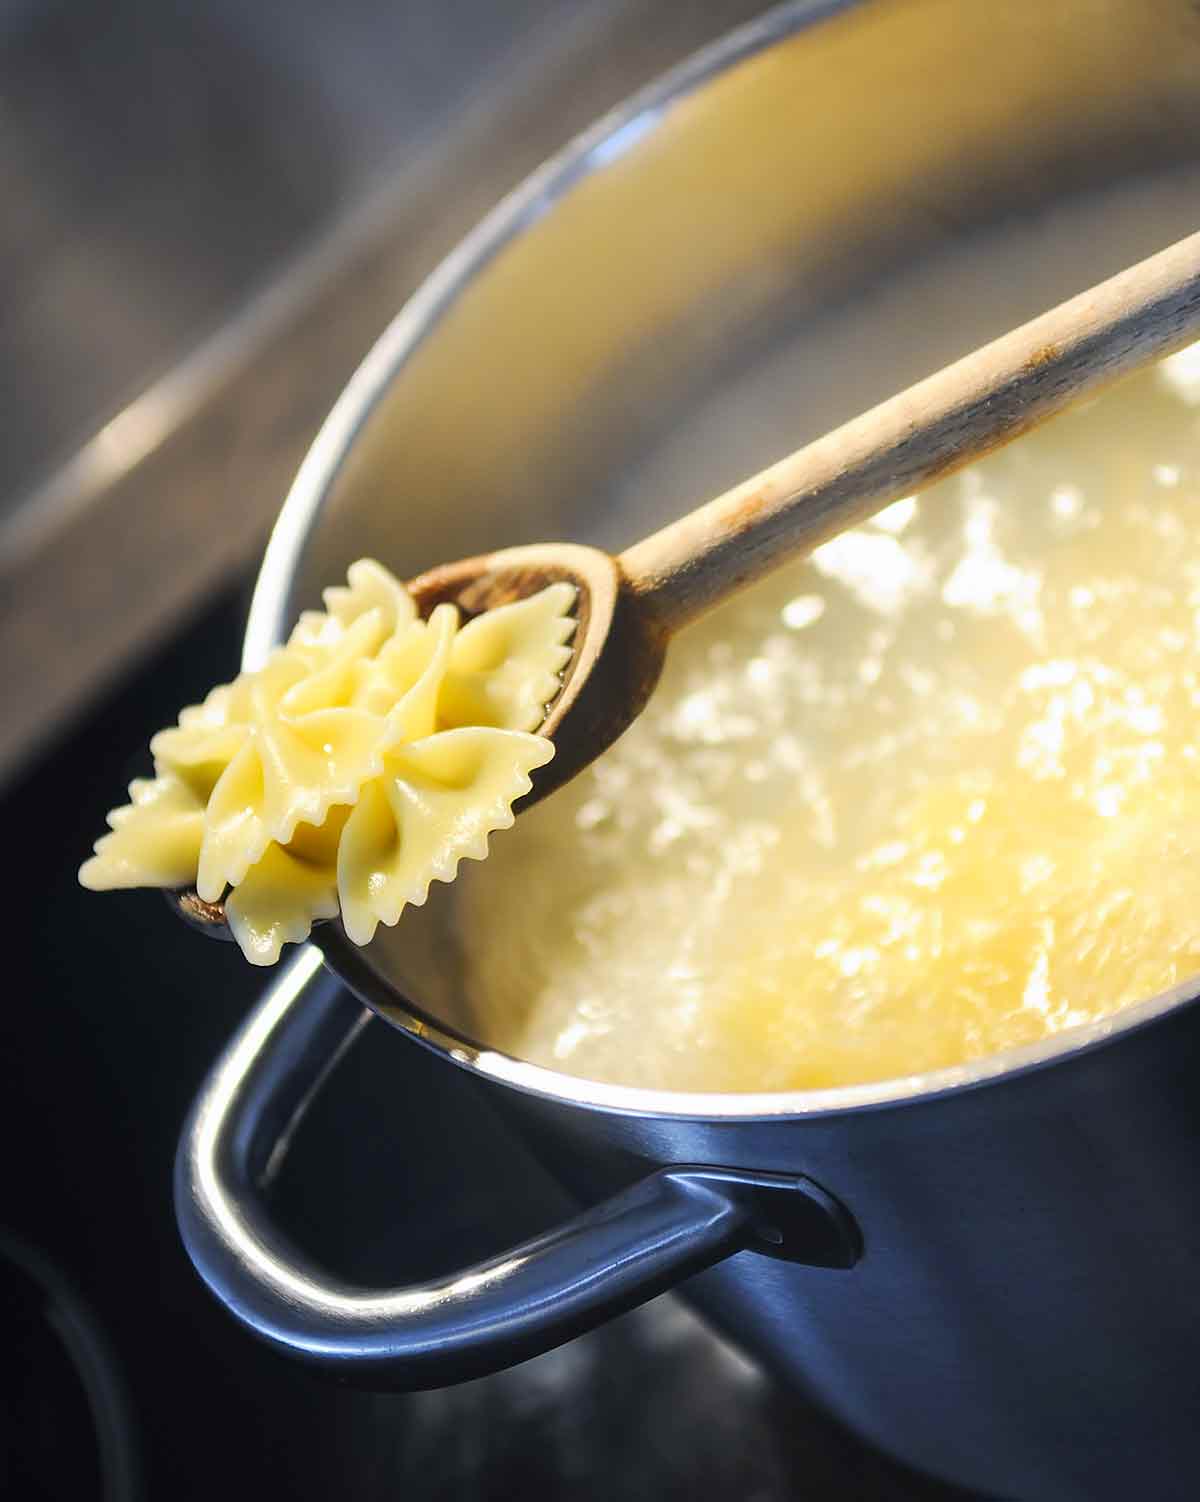 A pot of bowtie pasta that is still undercooked on the stove